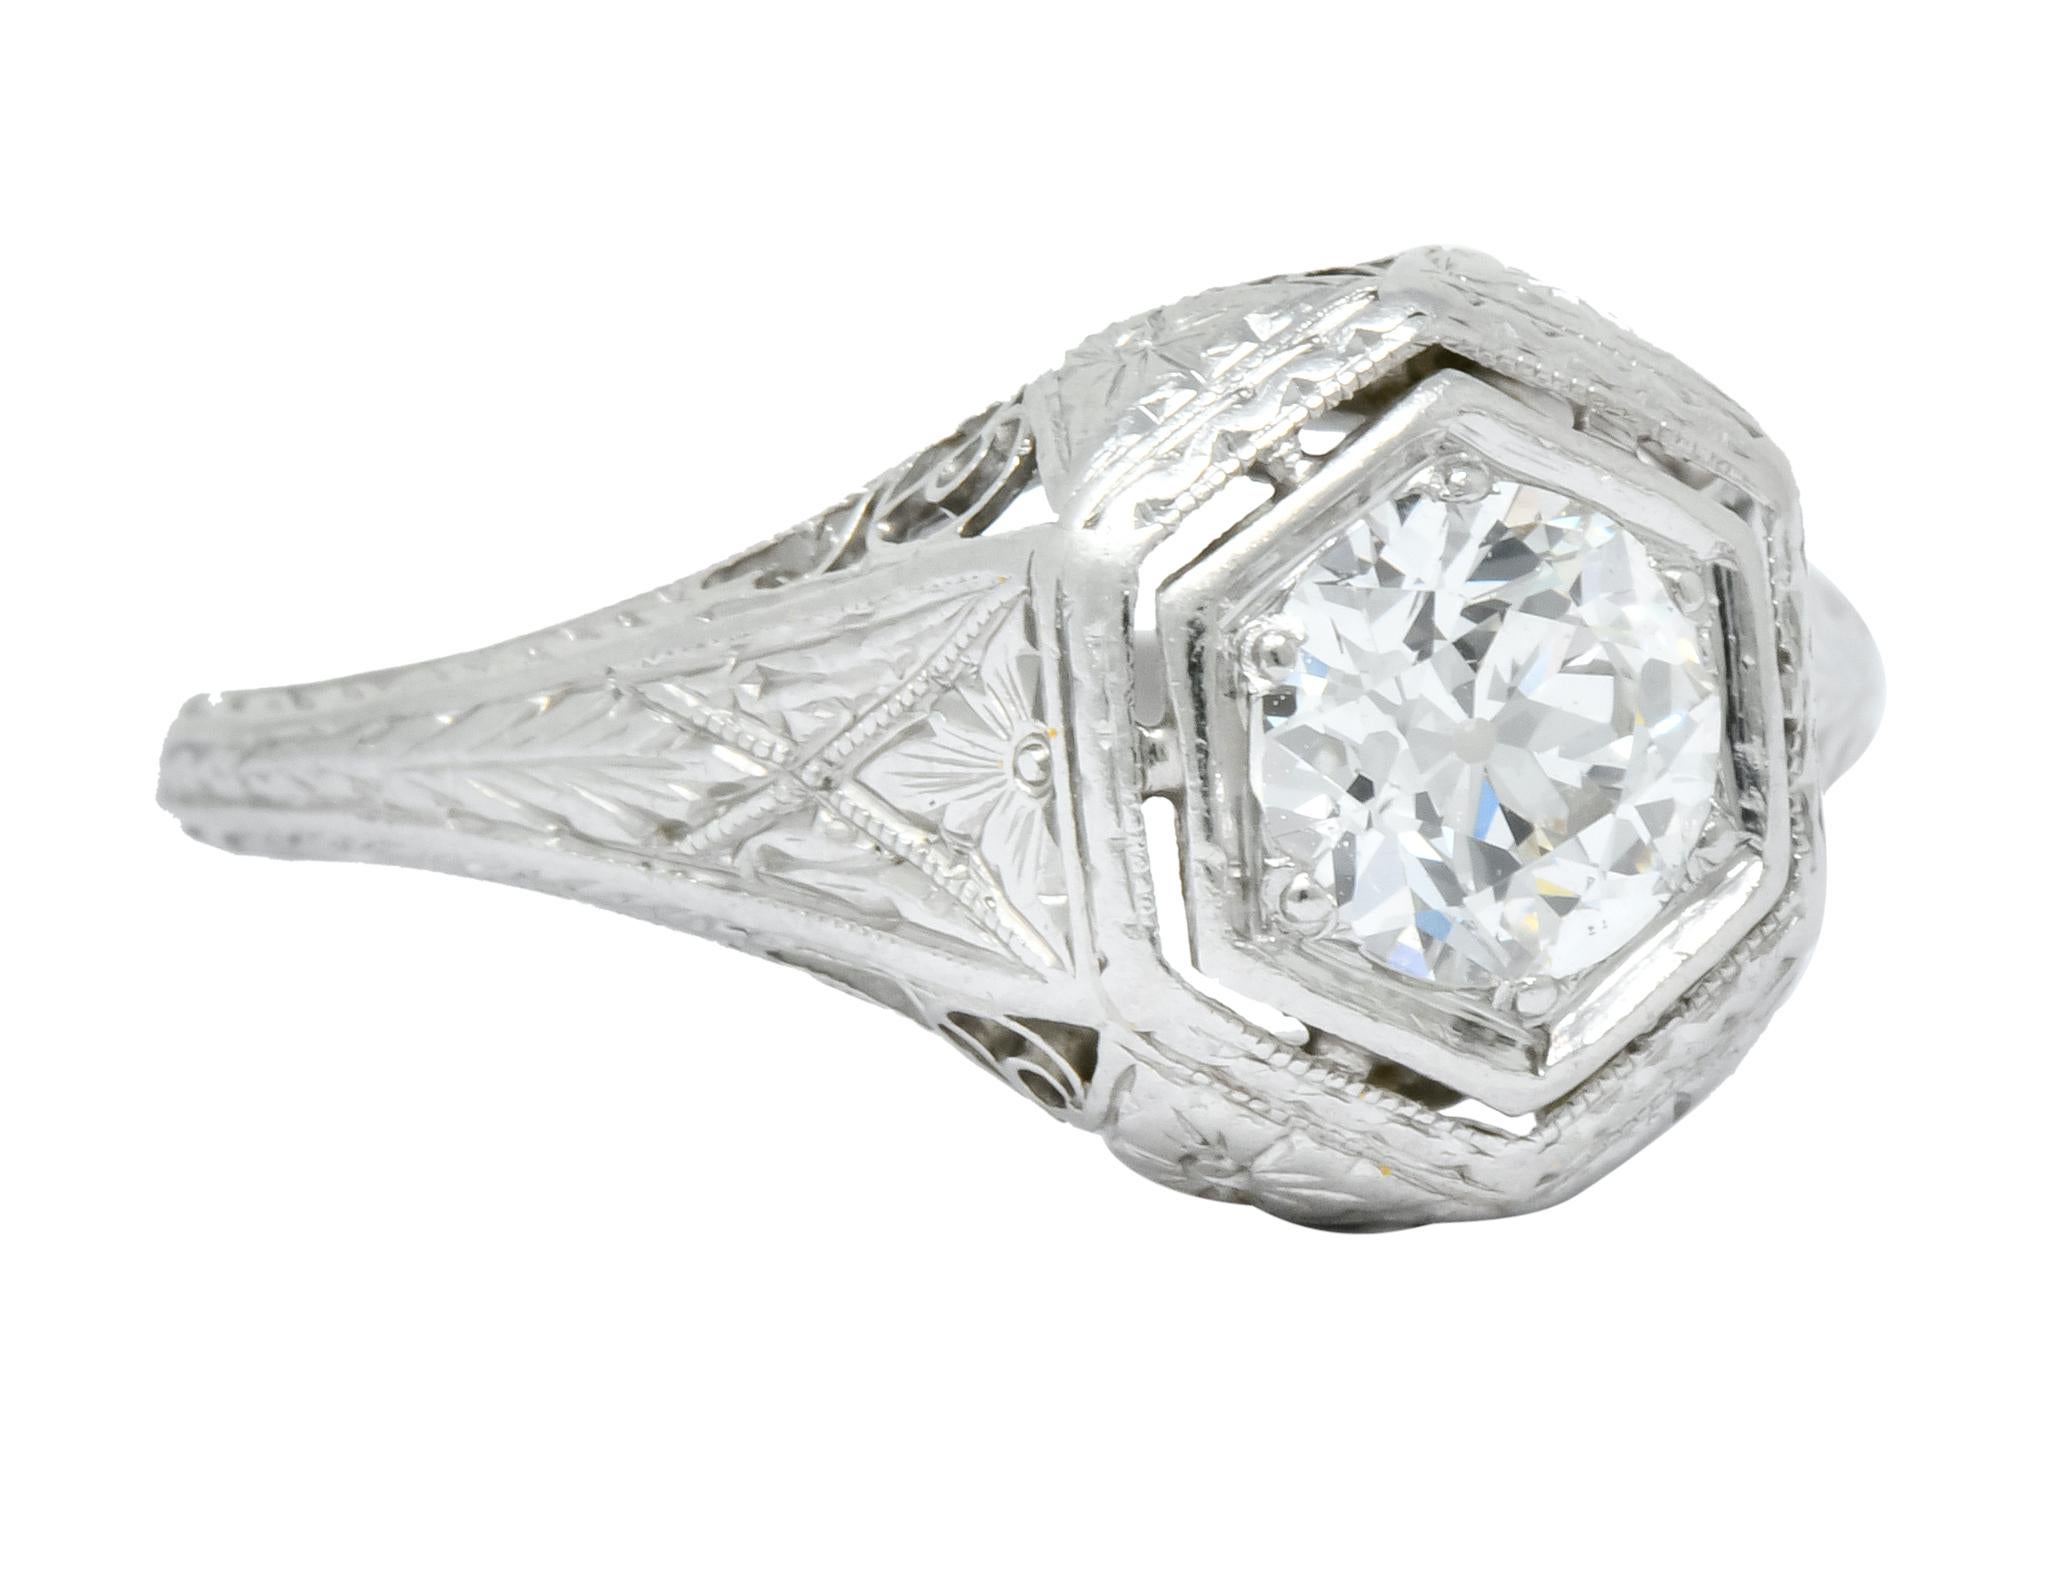 Centering an old European cut diamond weighing approximately 0.63 carat, I color and VS clarity

Prong set in a hexagonal mount with engraved floral gallery and pierced details

With engraved foliate motif on shoulders and partially down